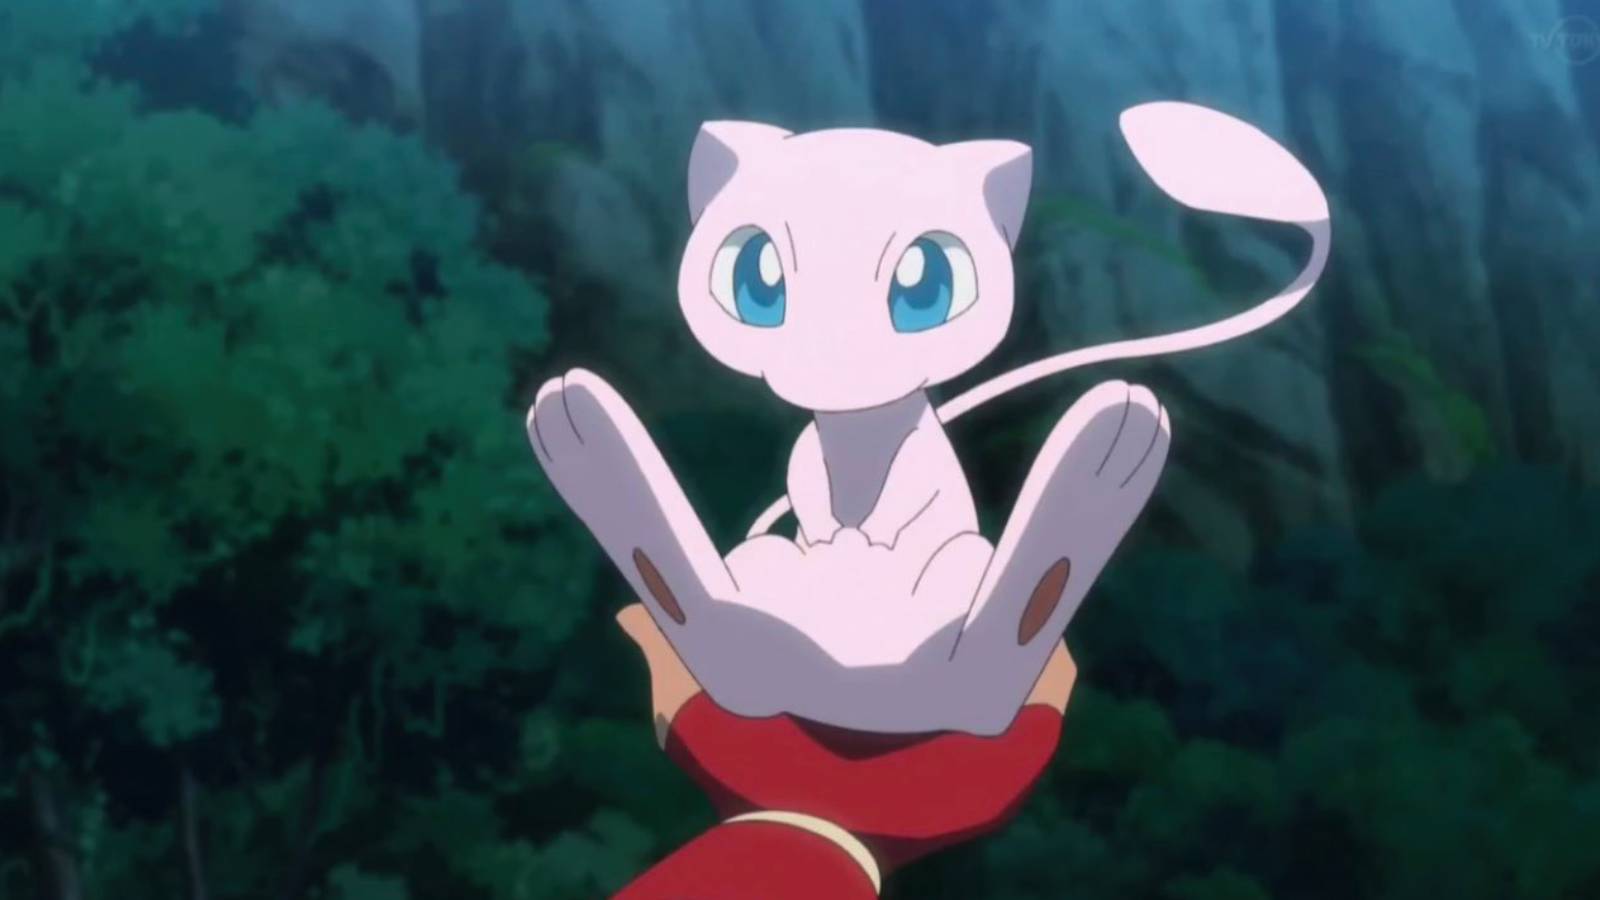 A still from the Pokemon anime shows the Pokemon Mew